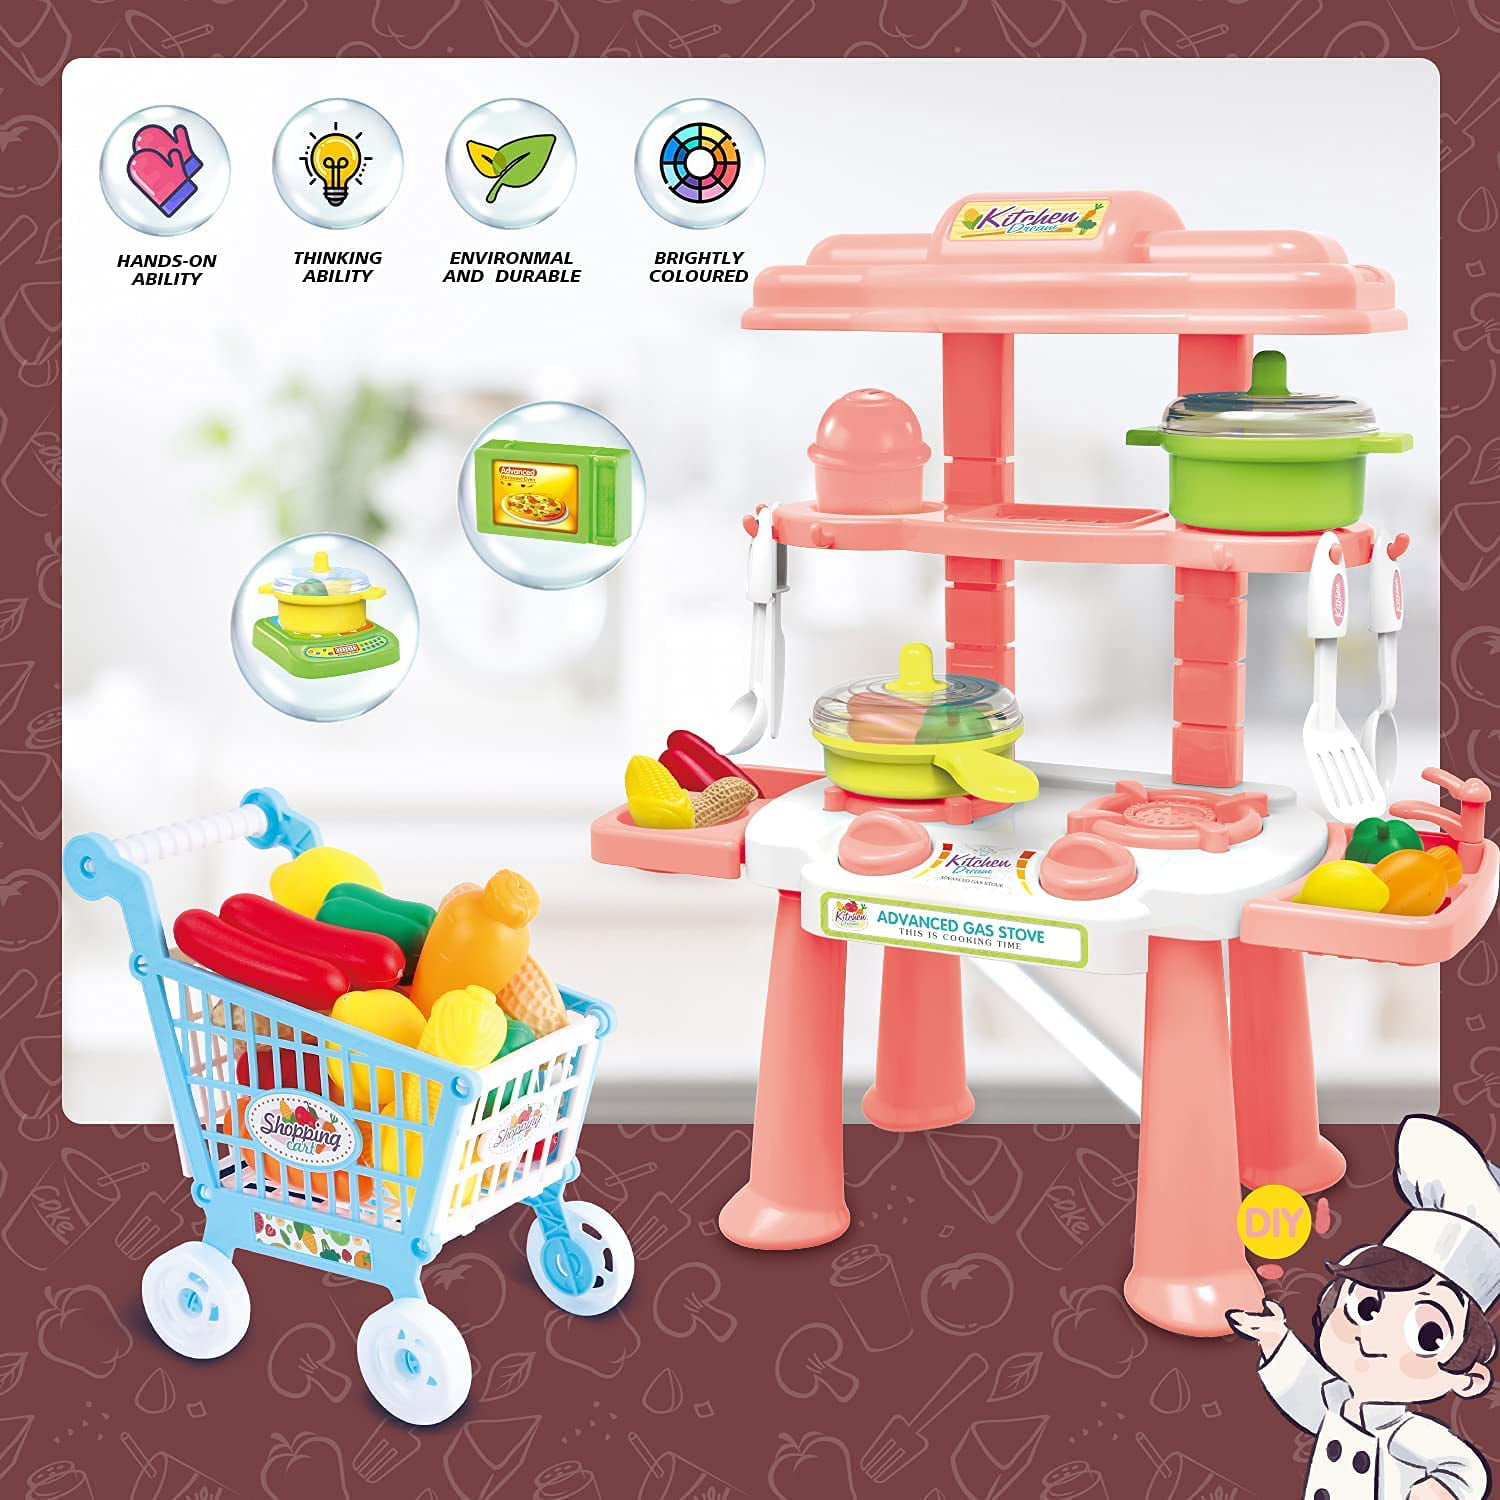 SDMAX Kids Pretend Play Pink Mini Kitchen With Shopping Cart & Accessories For Age 3+